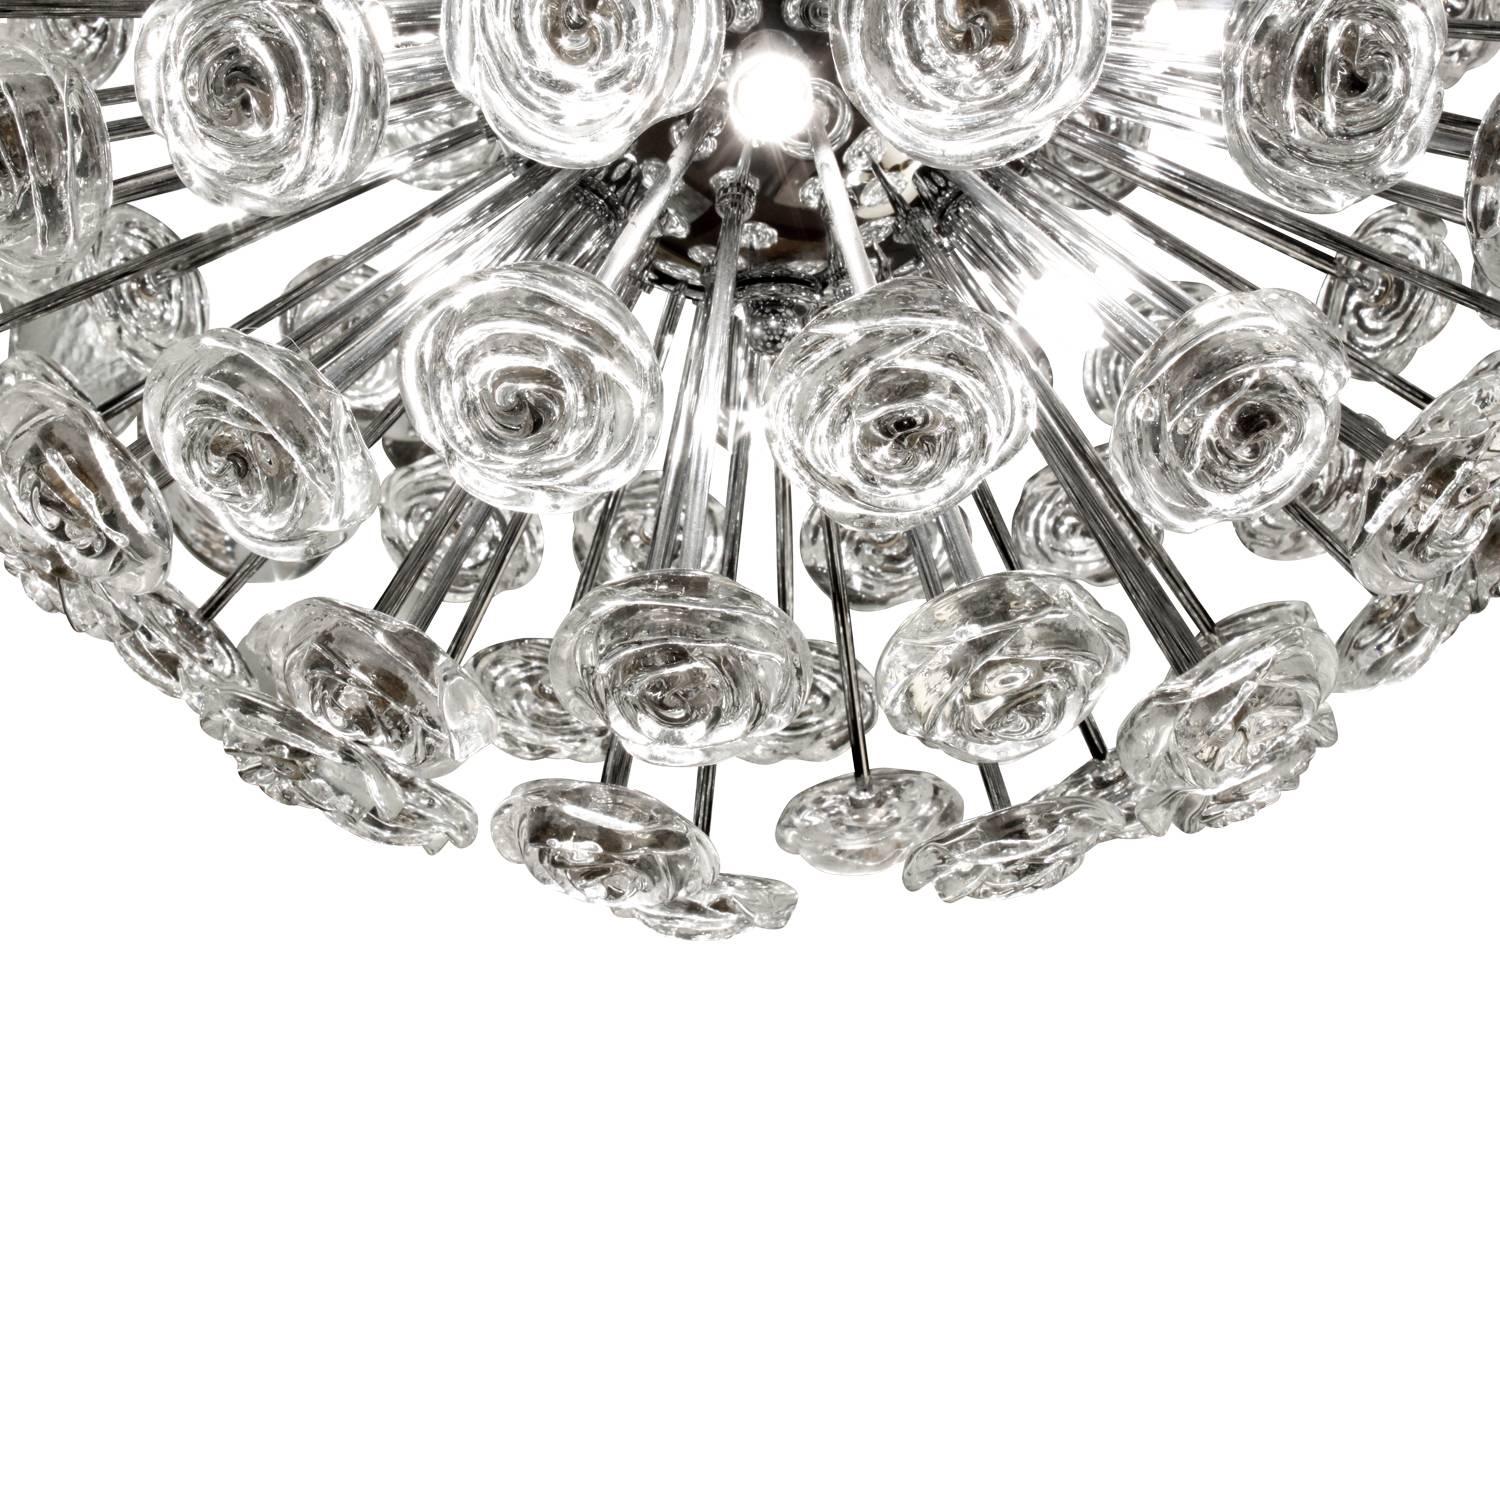 Large sphere chandelier in chrome with molded glass flowers, Sweden, 1960s.
Diameter of chandelier is 28 inches. It hangs on an adjustable cable which can accommodate almost any drop.